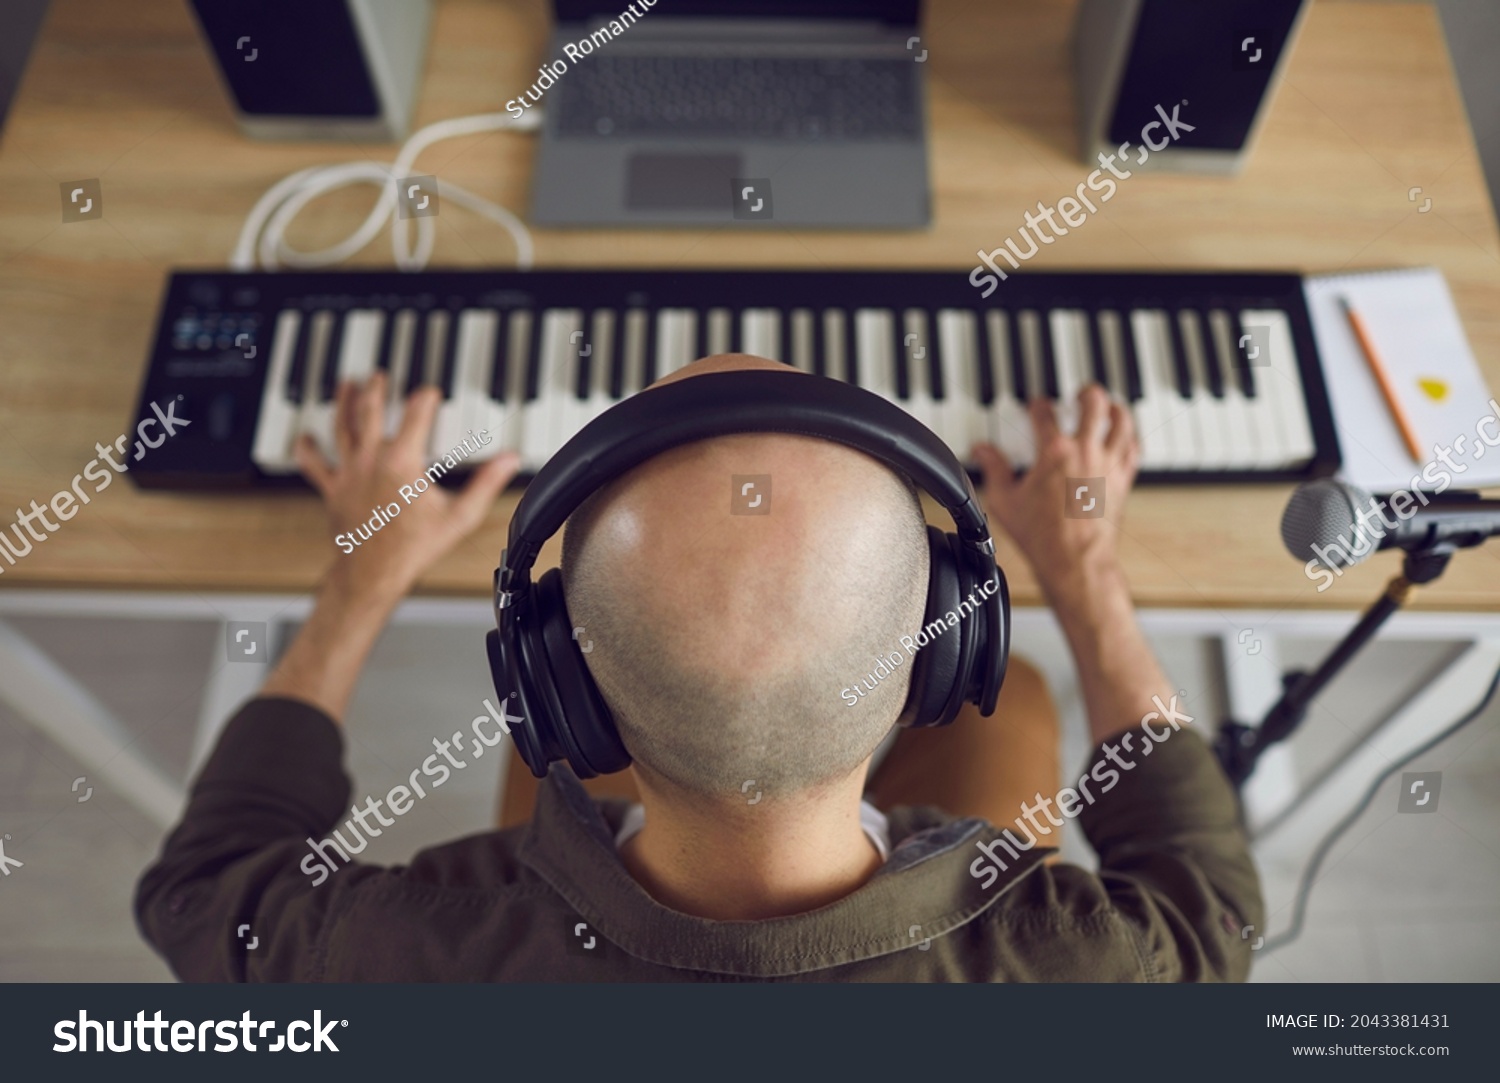 stock-photo-high-angle-closeup-shot-from-above-of-creative-talented-bald-headed-pianist-wearing-headphones-2043381431